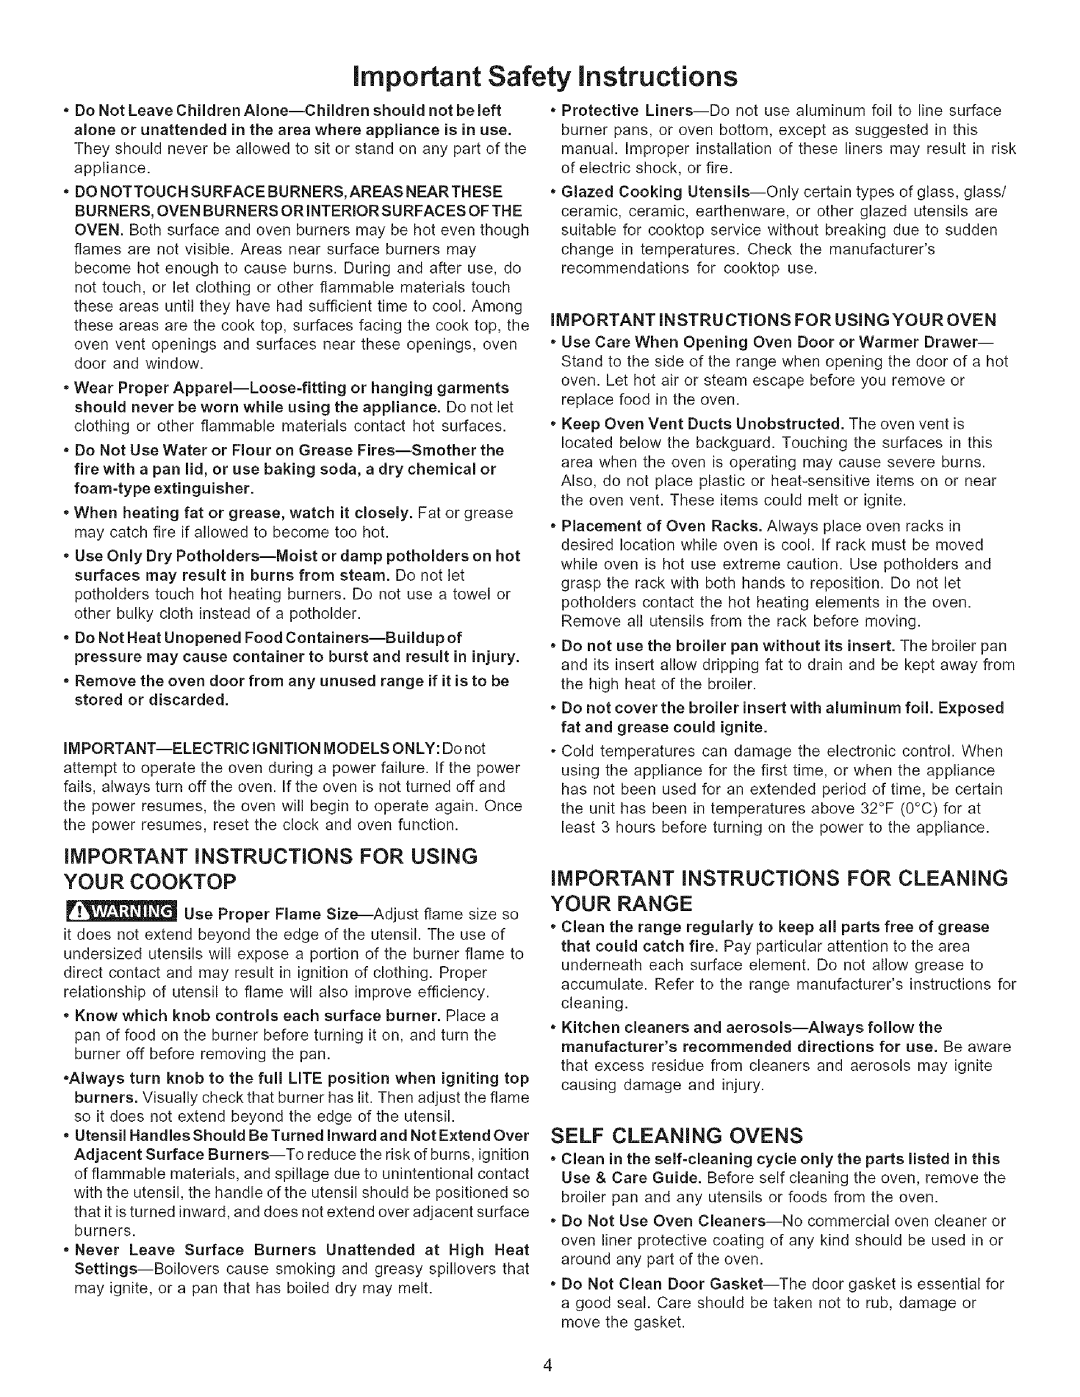 Kenmore 790.7943 manual important Safety instructions, Important Instructions For Using Your Cooktop, Your Range 